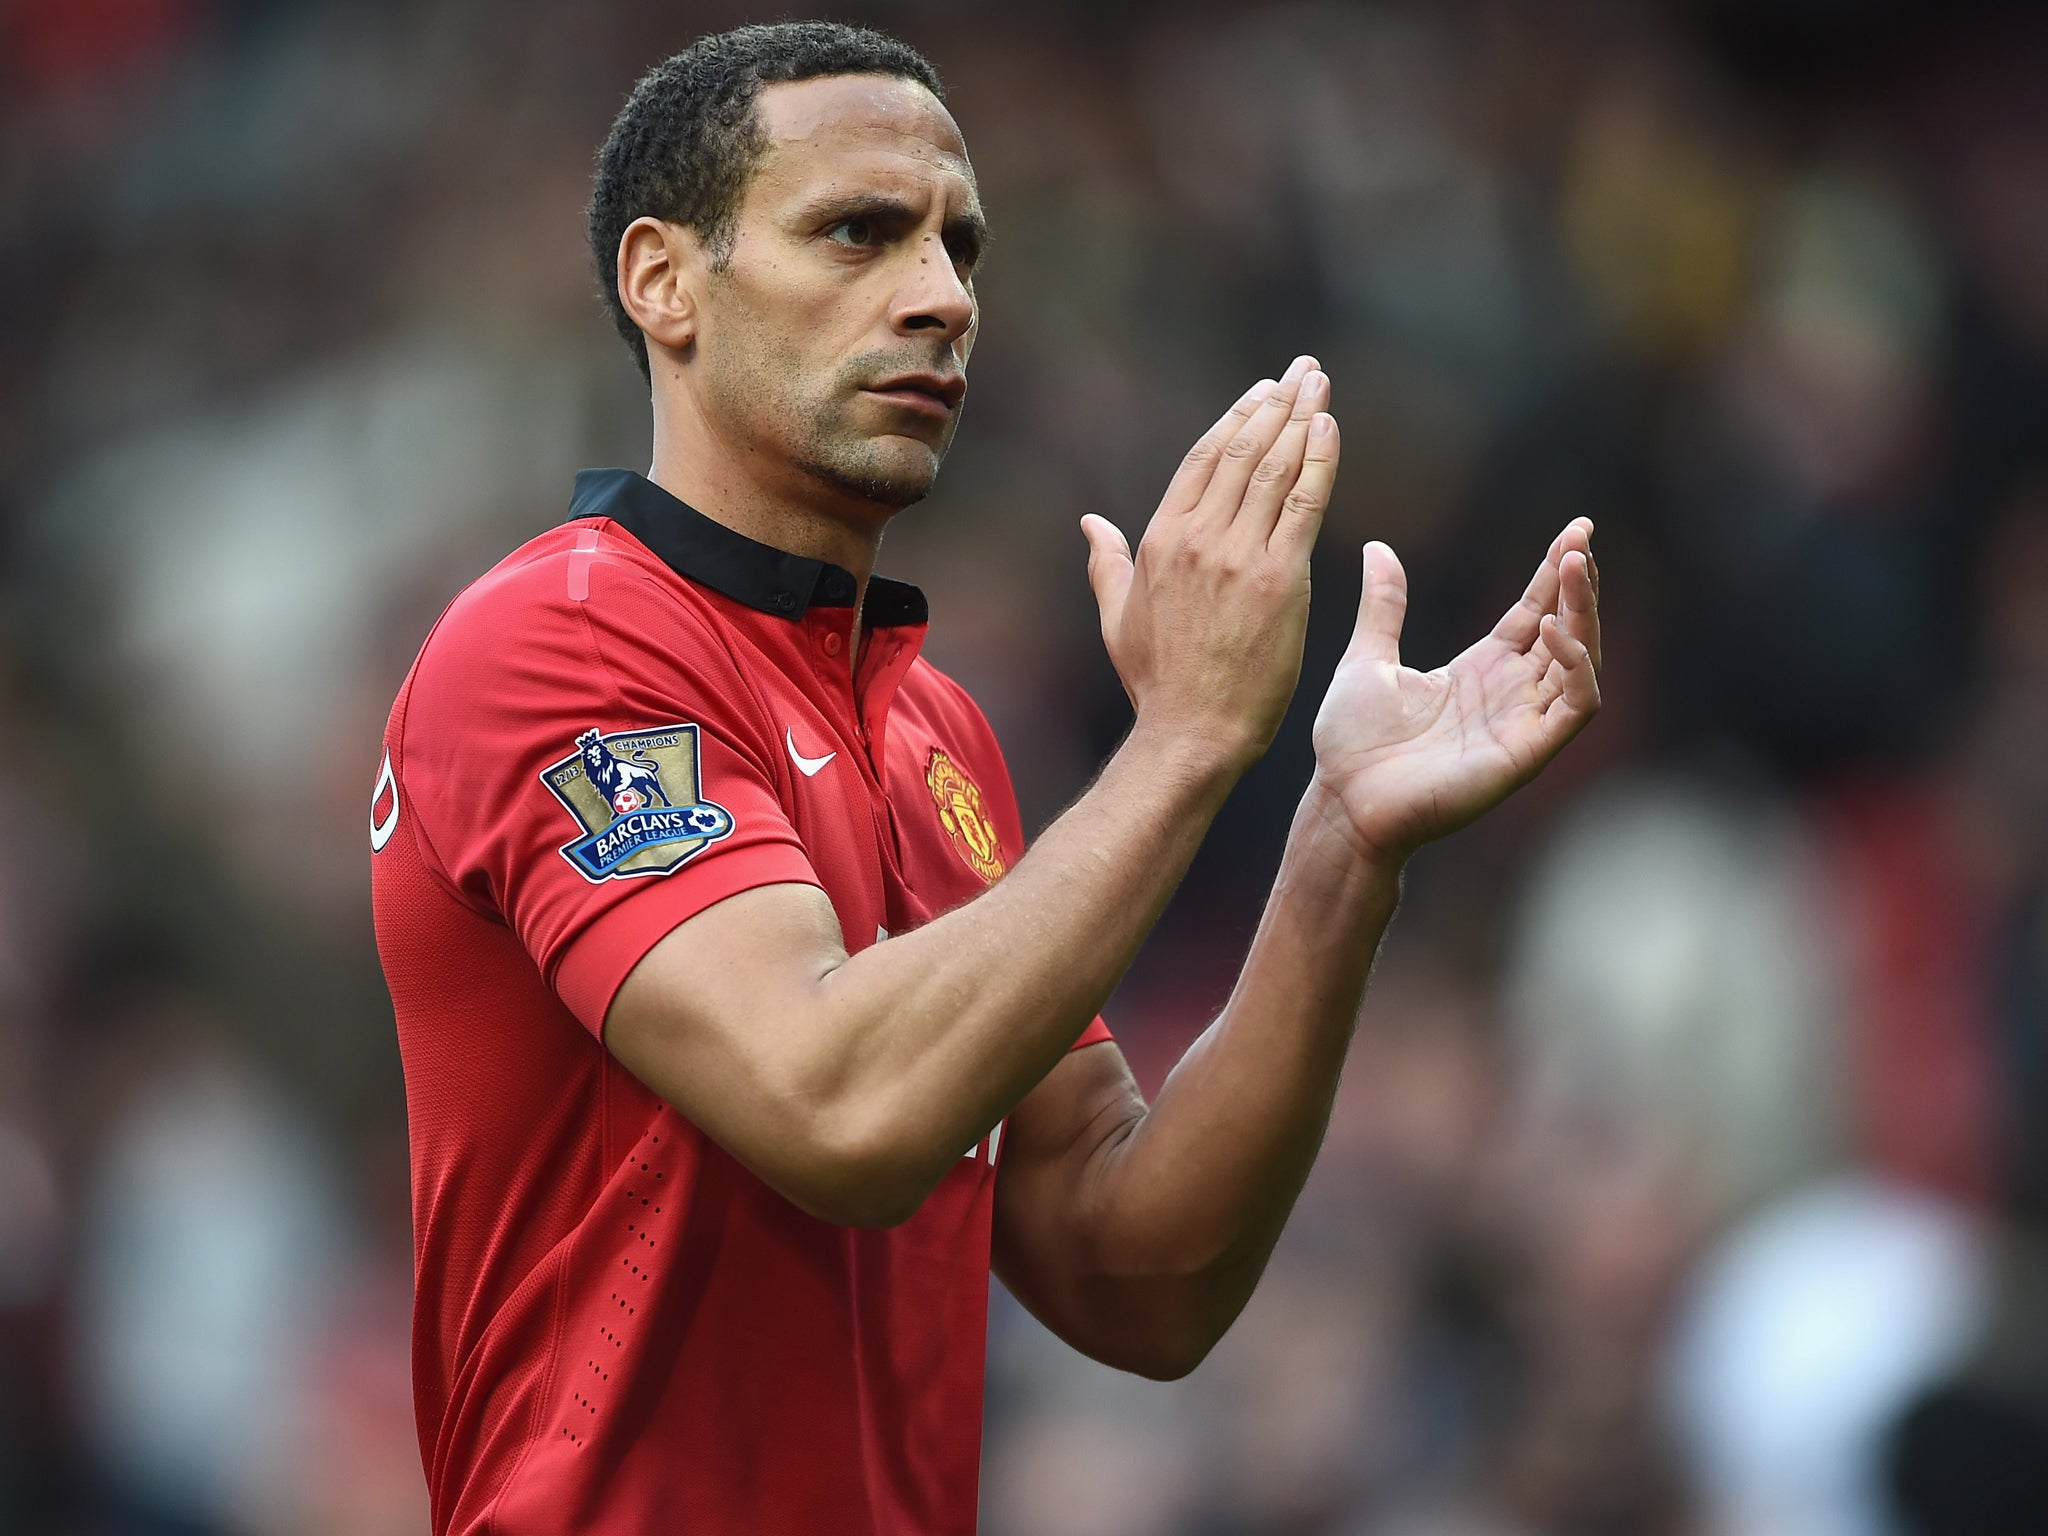 Rio Ferdinand has revealed his intention to continue his playing career with Manchester United